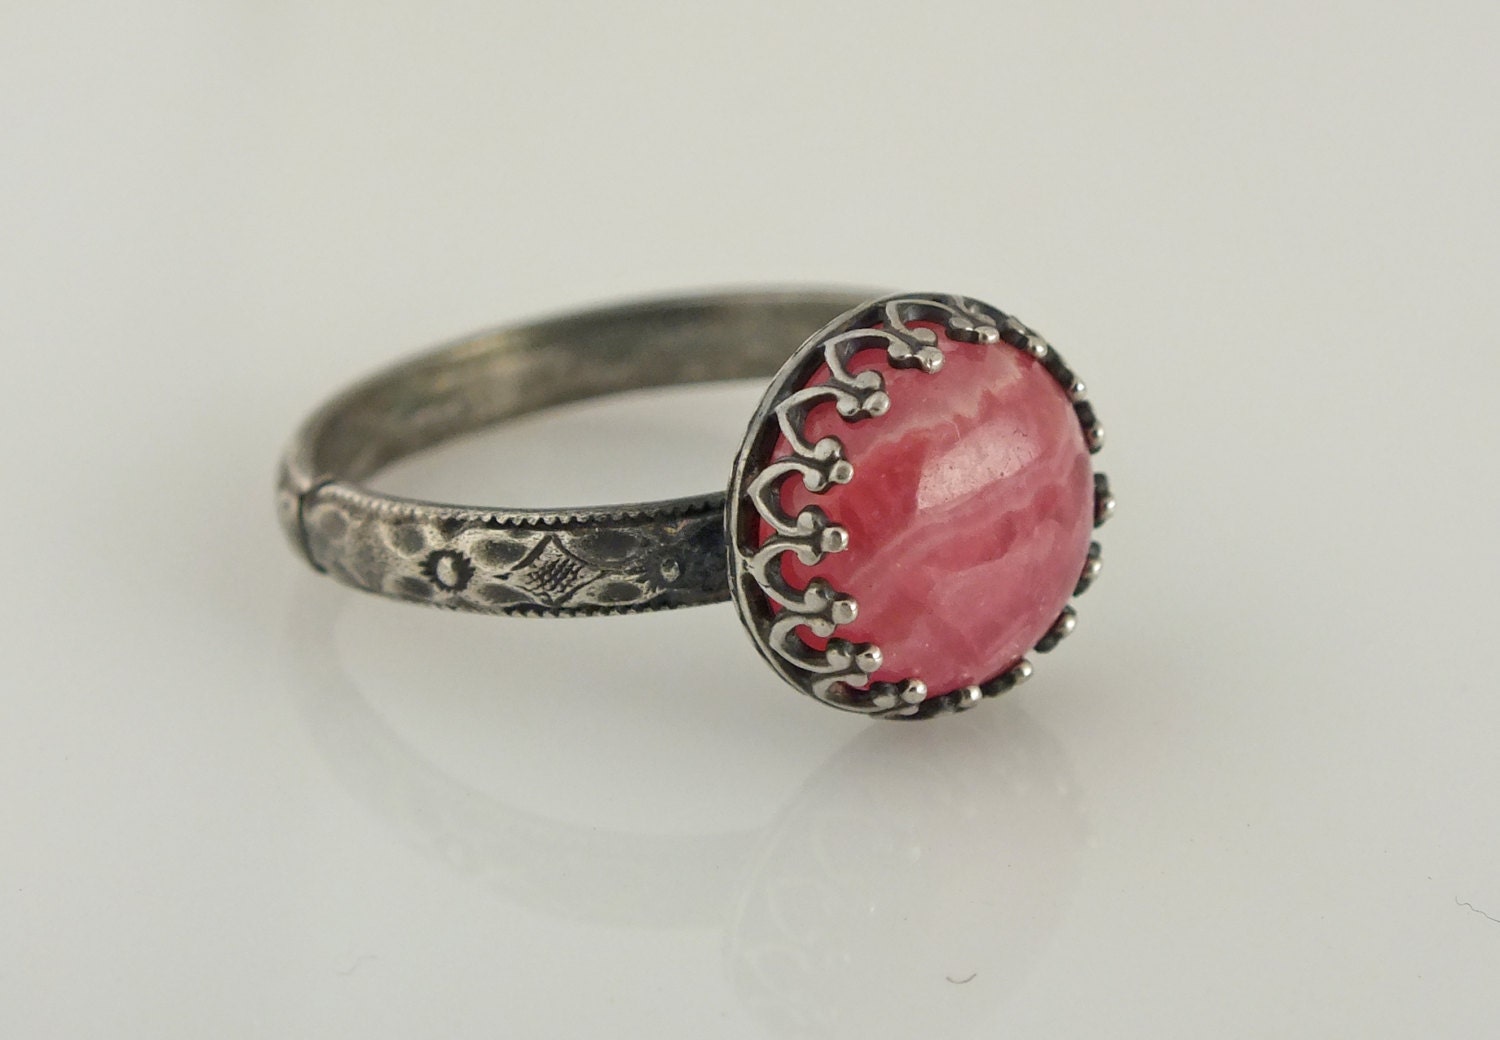 Rhodochrosite Oxidized Crown Ring, Pink Gemstone Bezel Ring, Size 8 Ring, Antiqued Floral Band Ring - GemLoungeJewelry